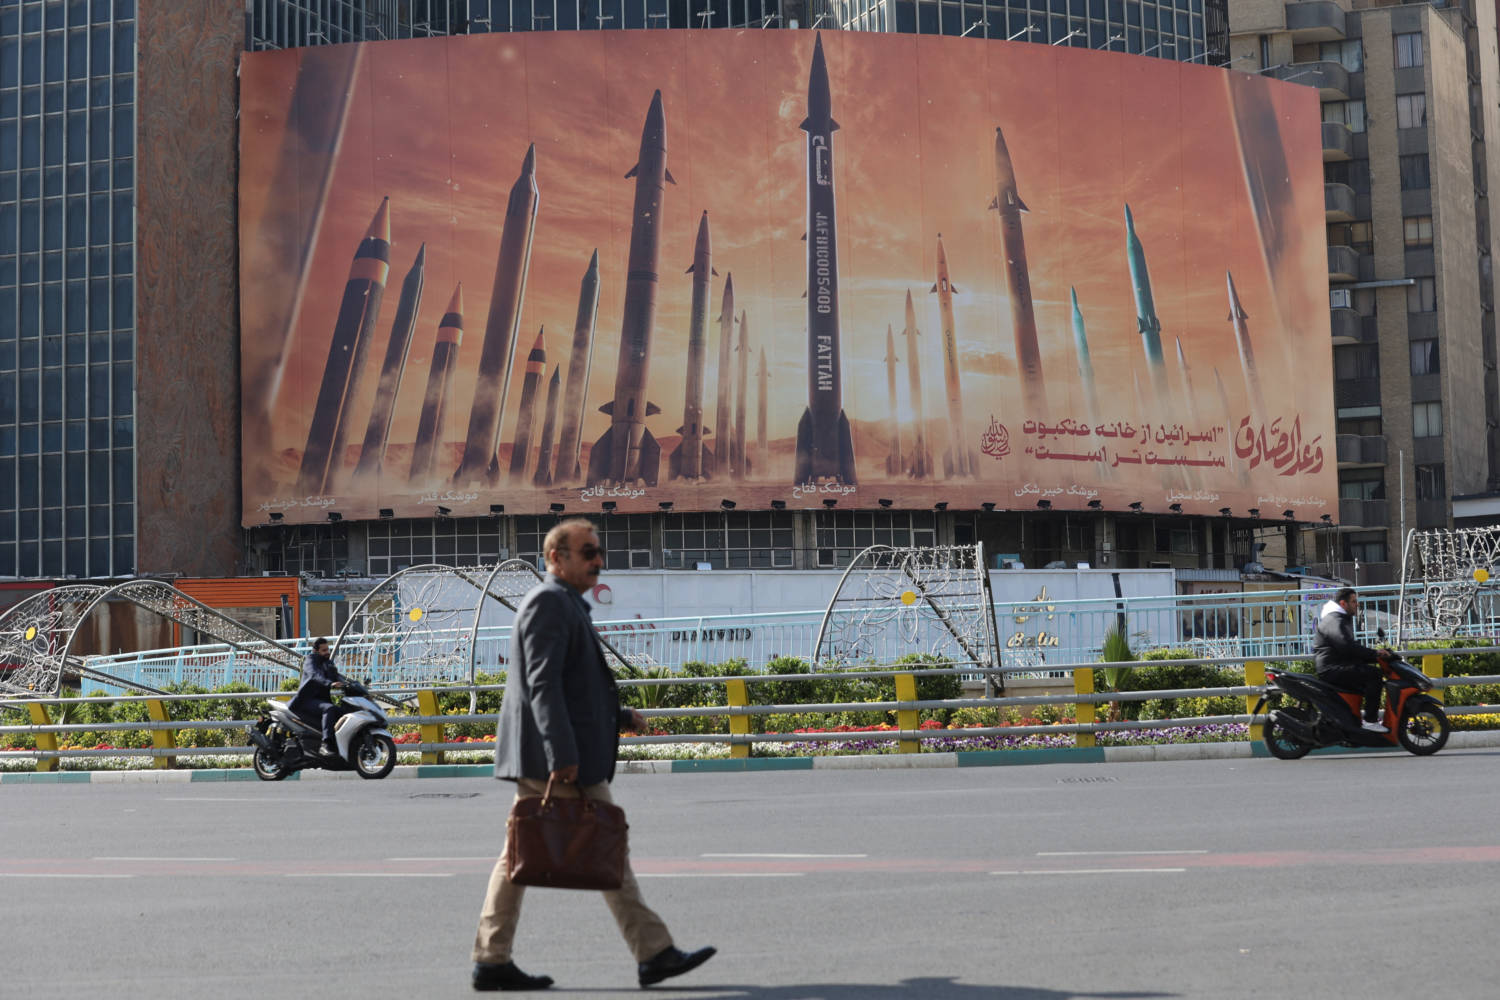 An Anti Israel Billboard With A Picture Of Iranian Missiles Is Seen In A Street In Tehran